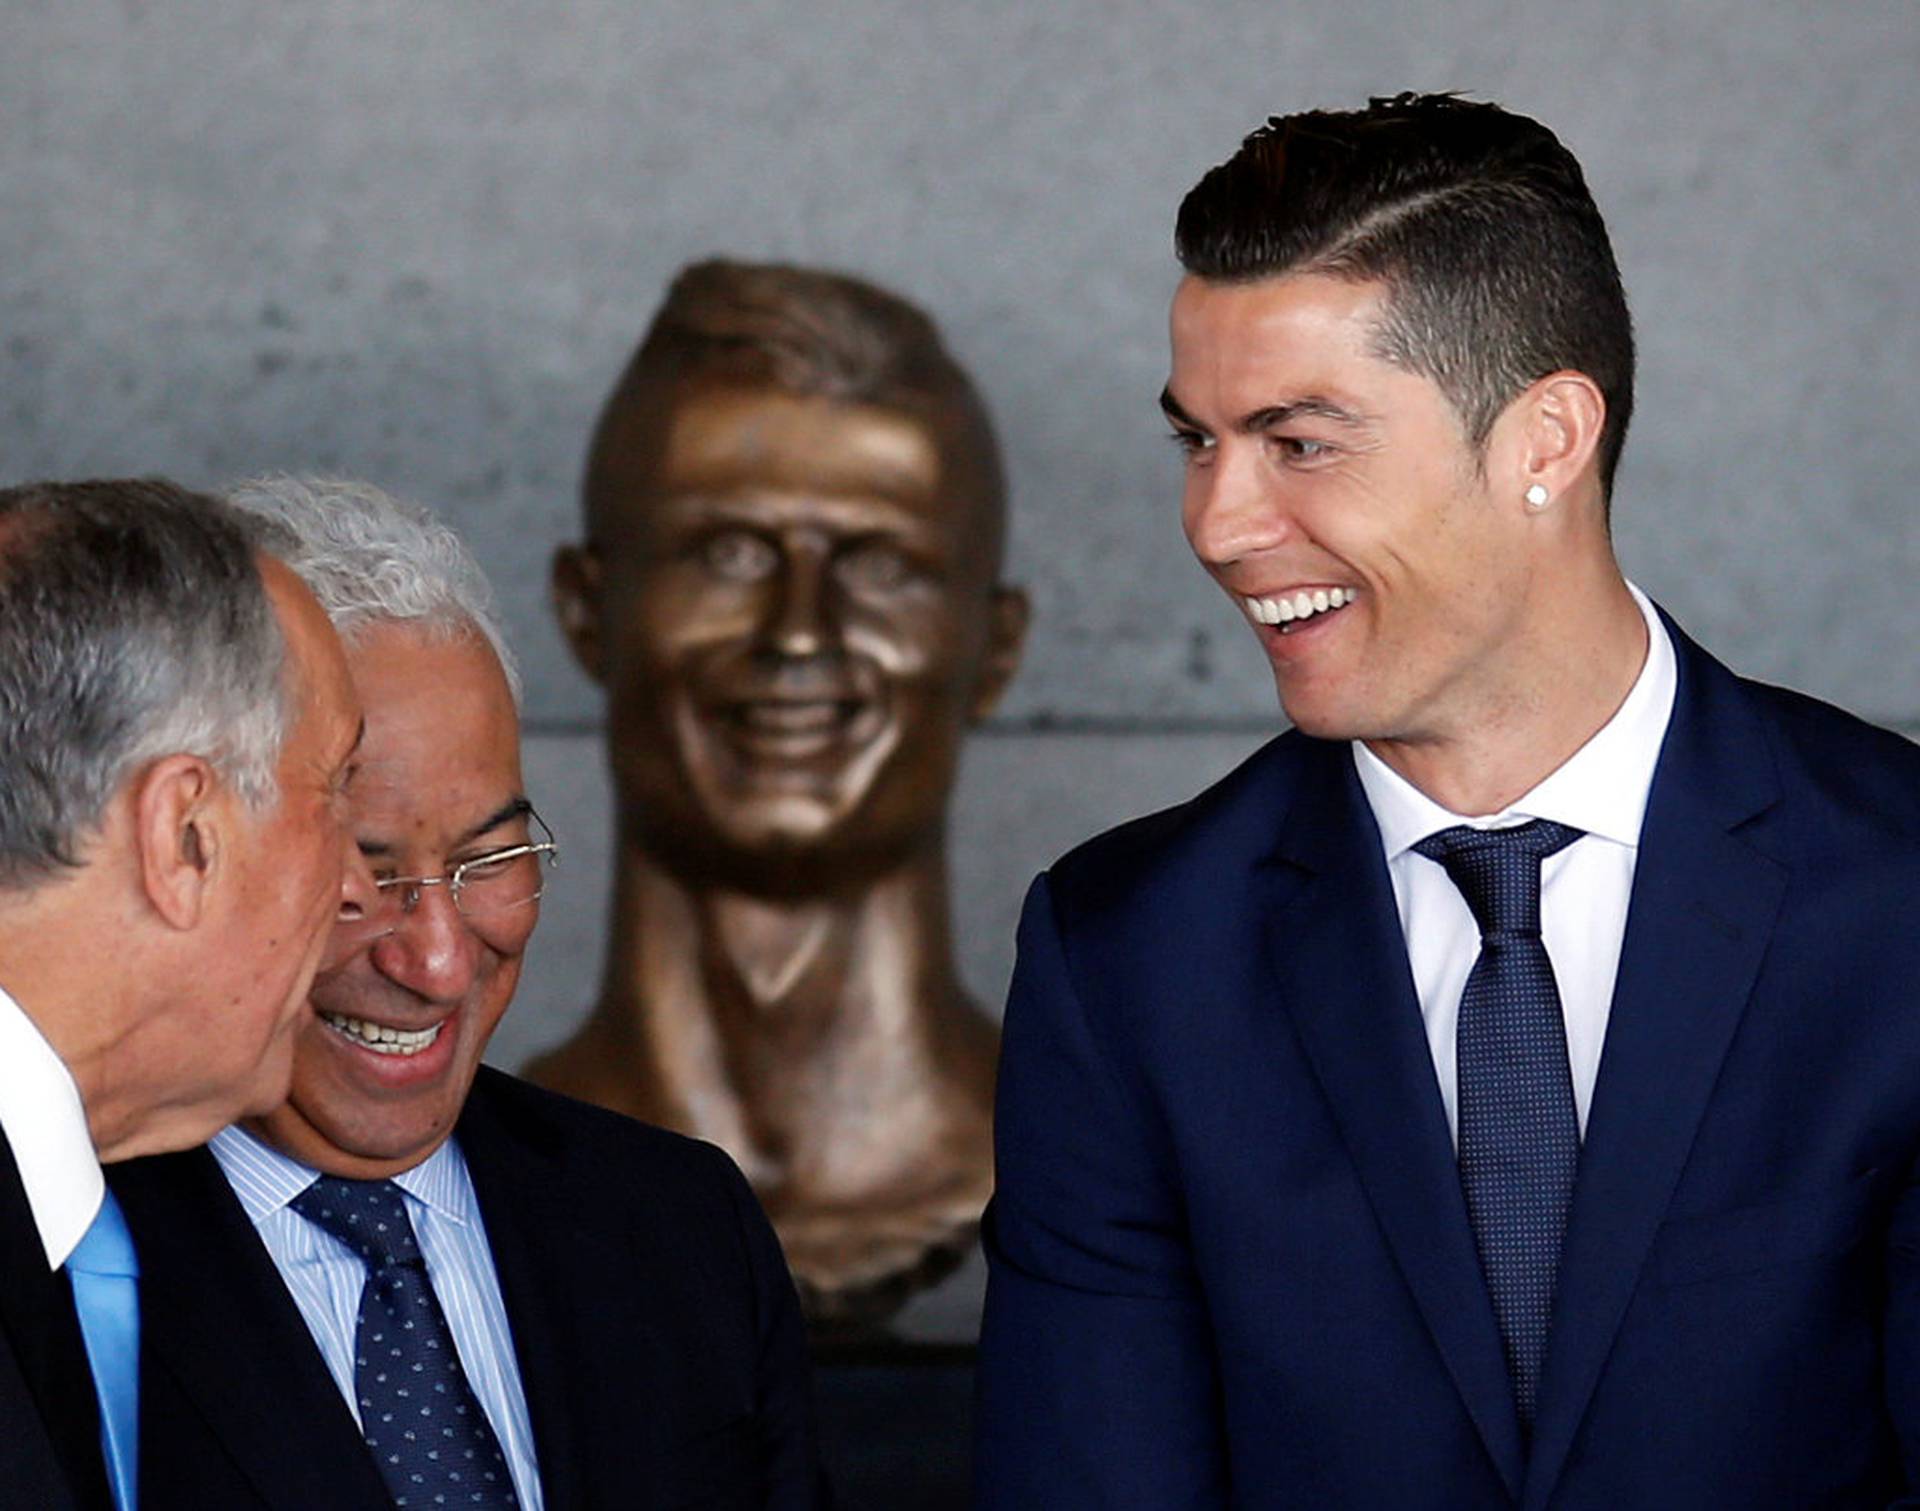 Real Madrid forward Cristiano Ronaldo attends the ceremony to rename Funchal airport as Cristiano Ronaldo Airport in Funchal